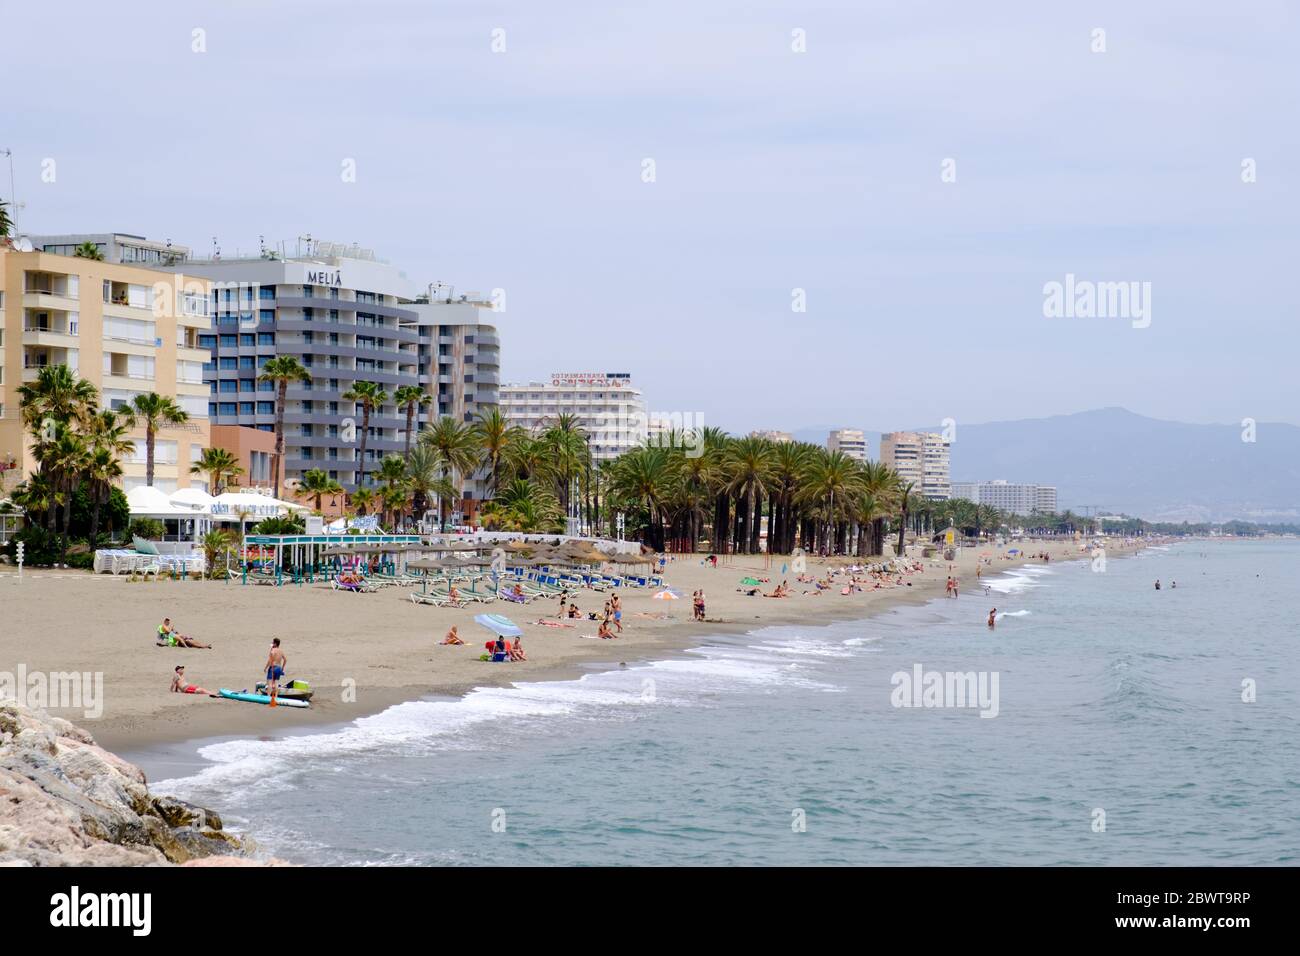 Phase 2 of the Covid-19 in Spain. Easing of restrictions on the beach at Torremolinos, Malaga, Andalucia, Costa del Sol, Spain, Europe Stock Photo